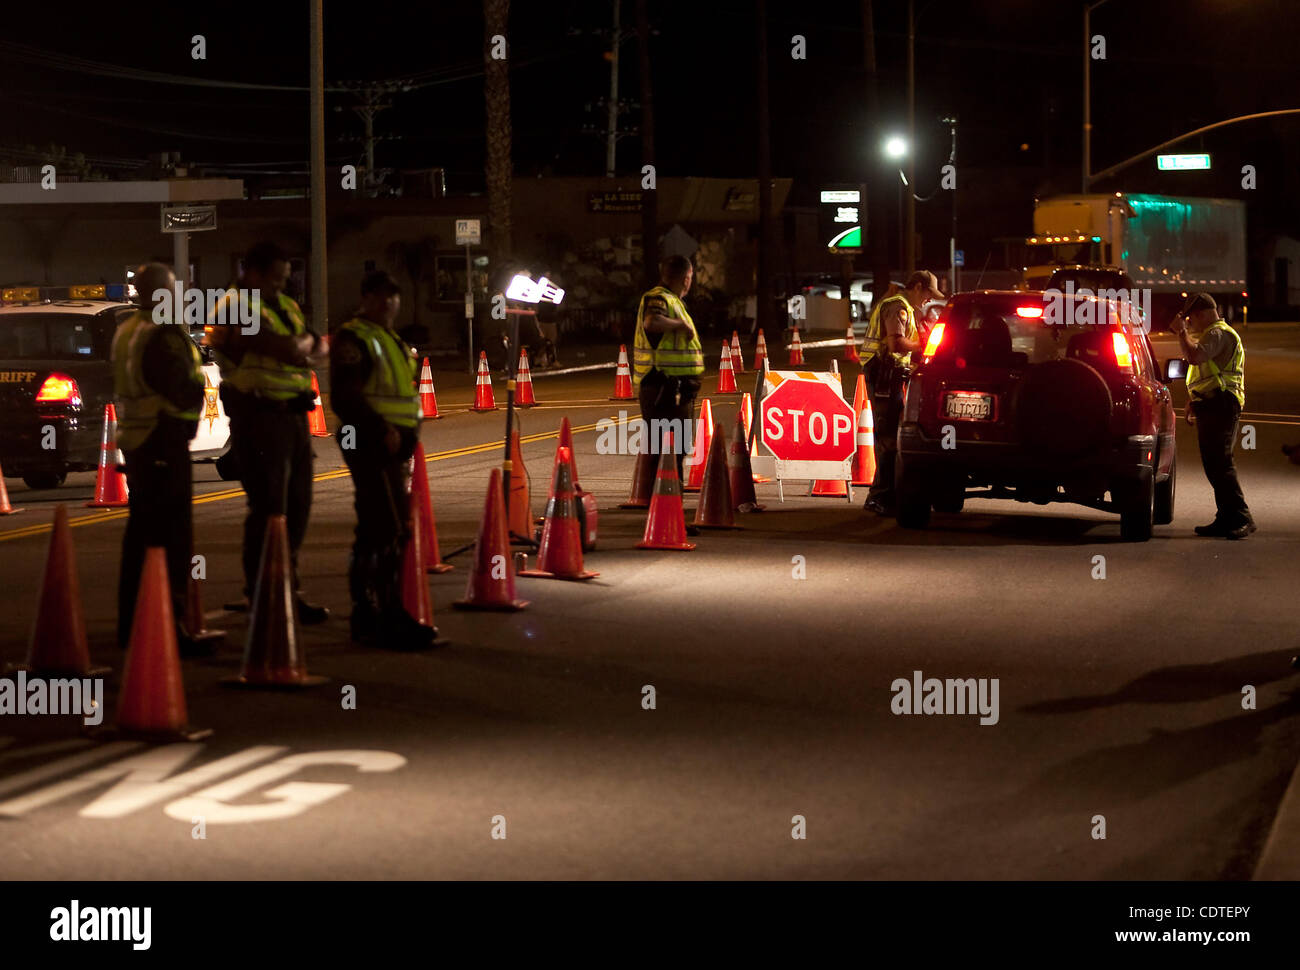 The Orange County Sheriff's Department conducted a traffic safety and DUI checkpoint along North El Camino Real Friday night. Stock Photo